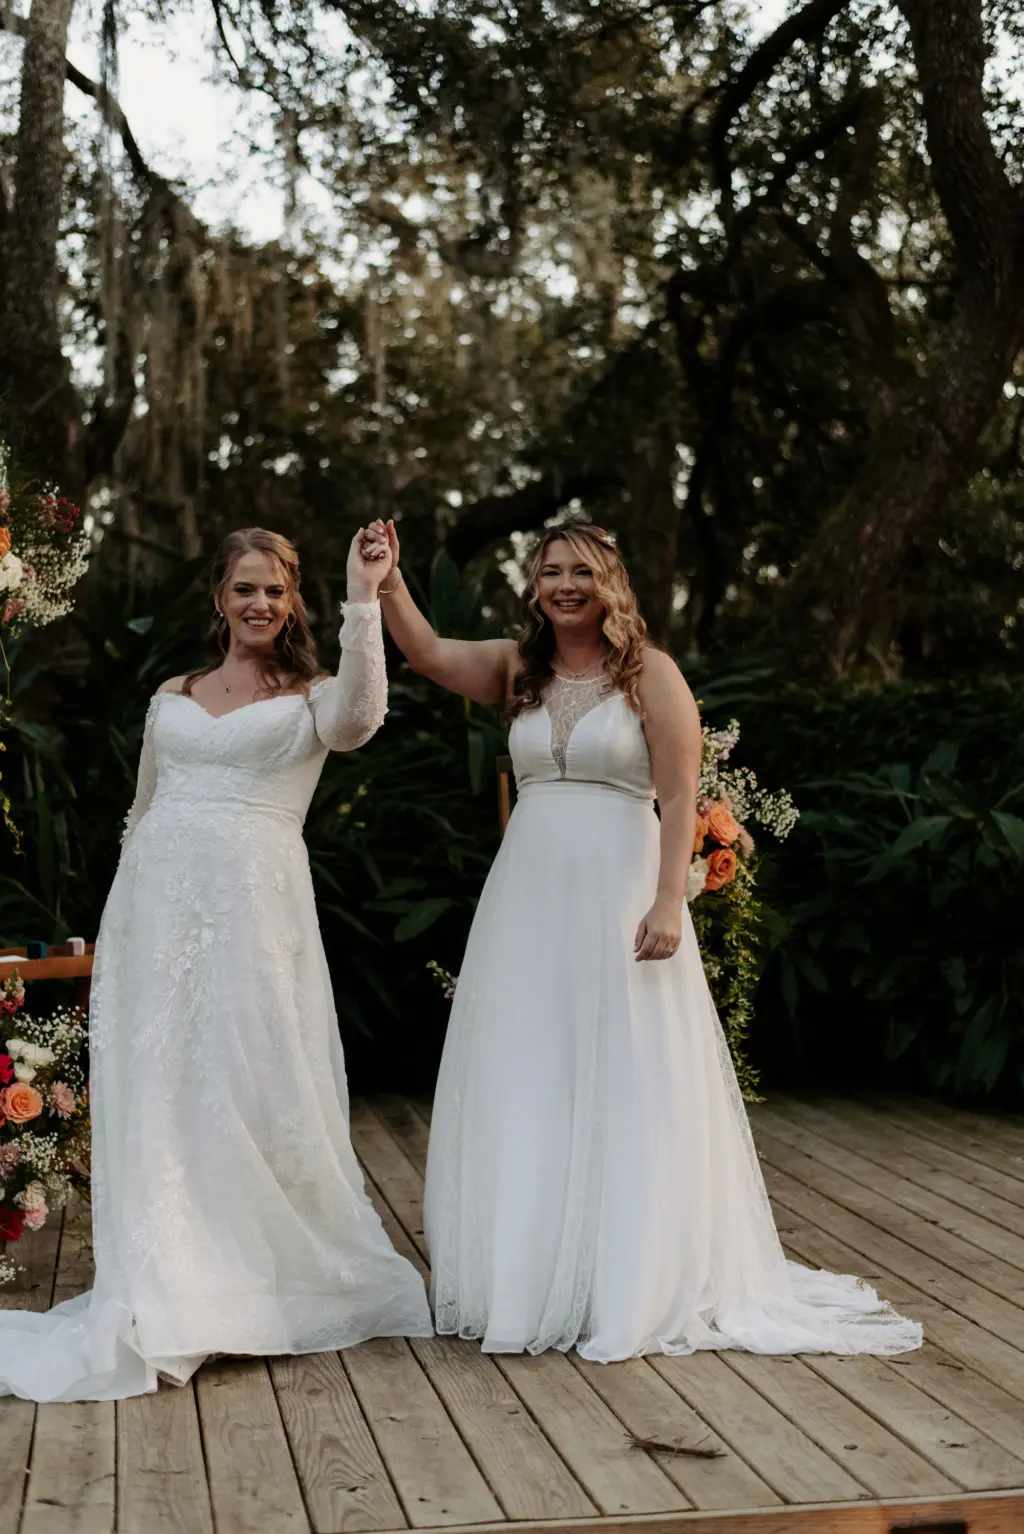 Just Married Same Sex Couple in Garden Wedding Ceremony Inspiration | Tampa Wedding Venue Mill Pond Estates | Planner Stephany Perry Events